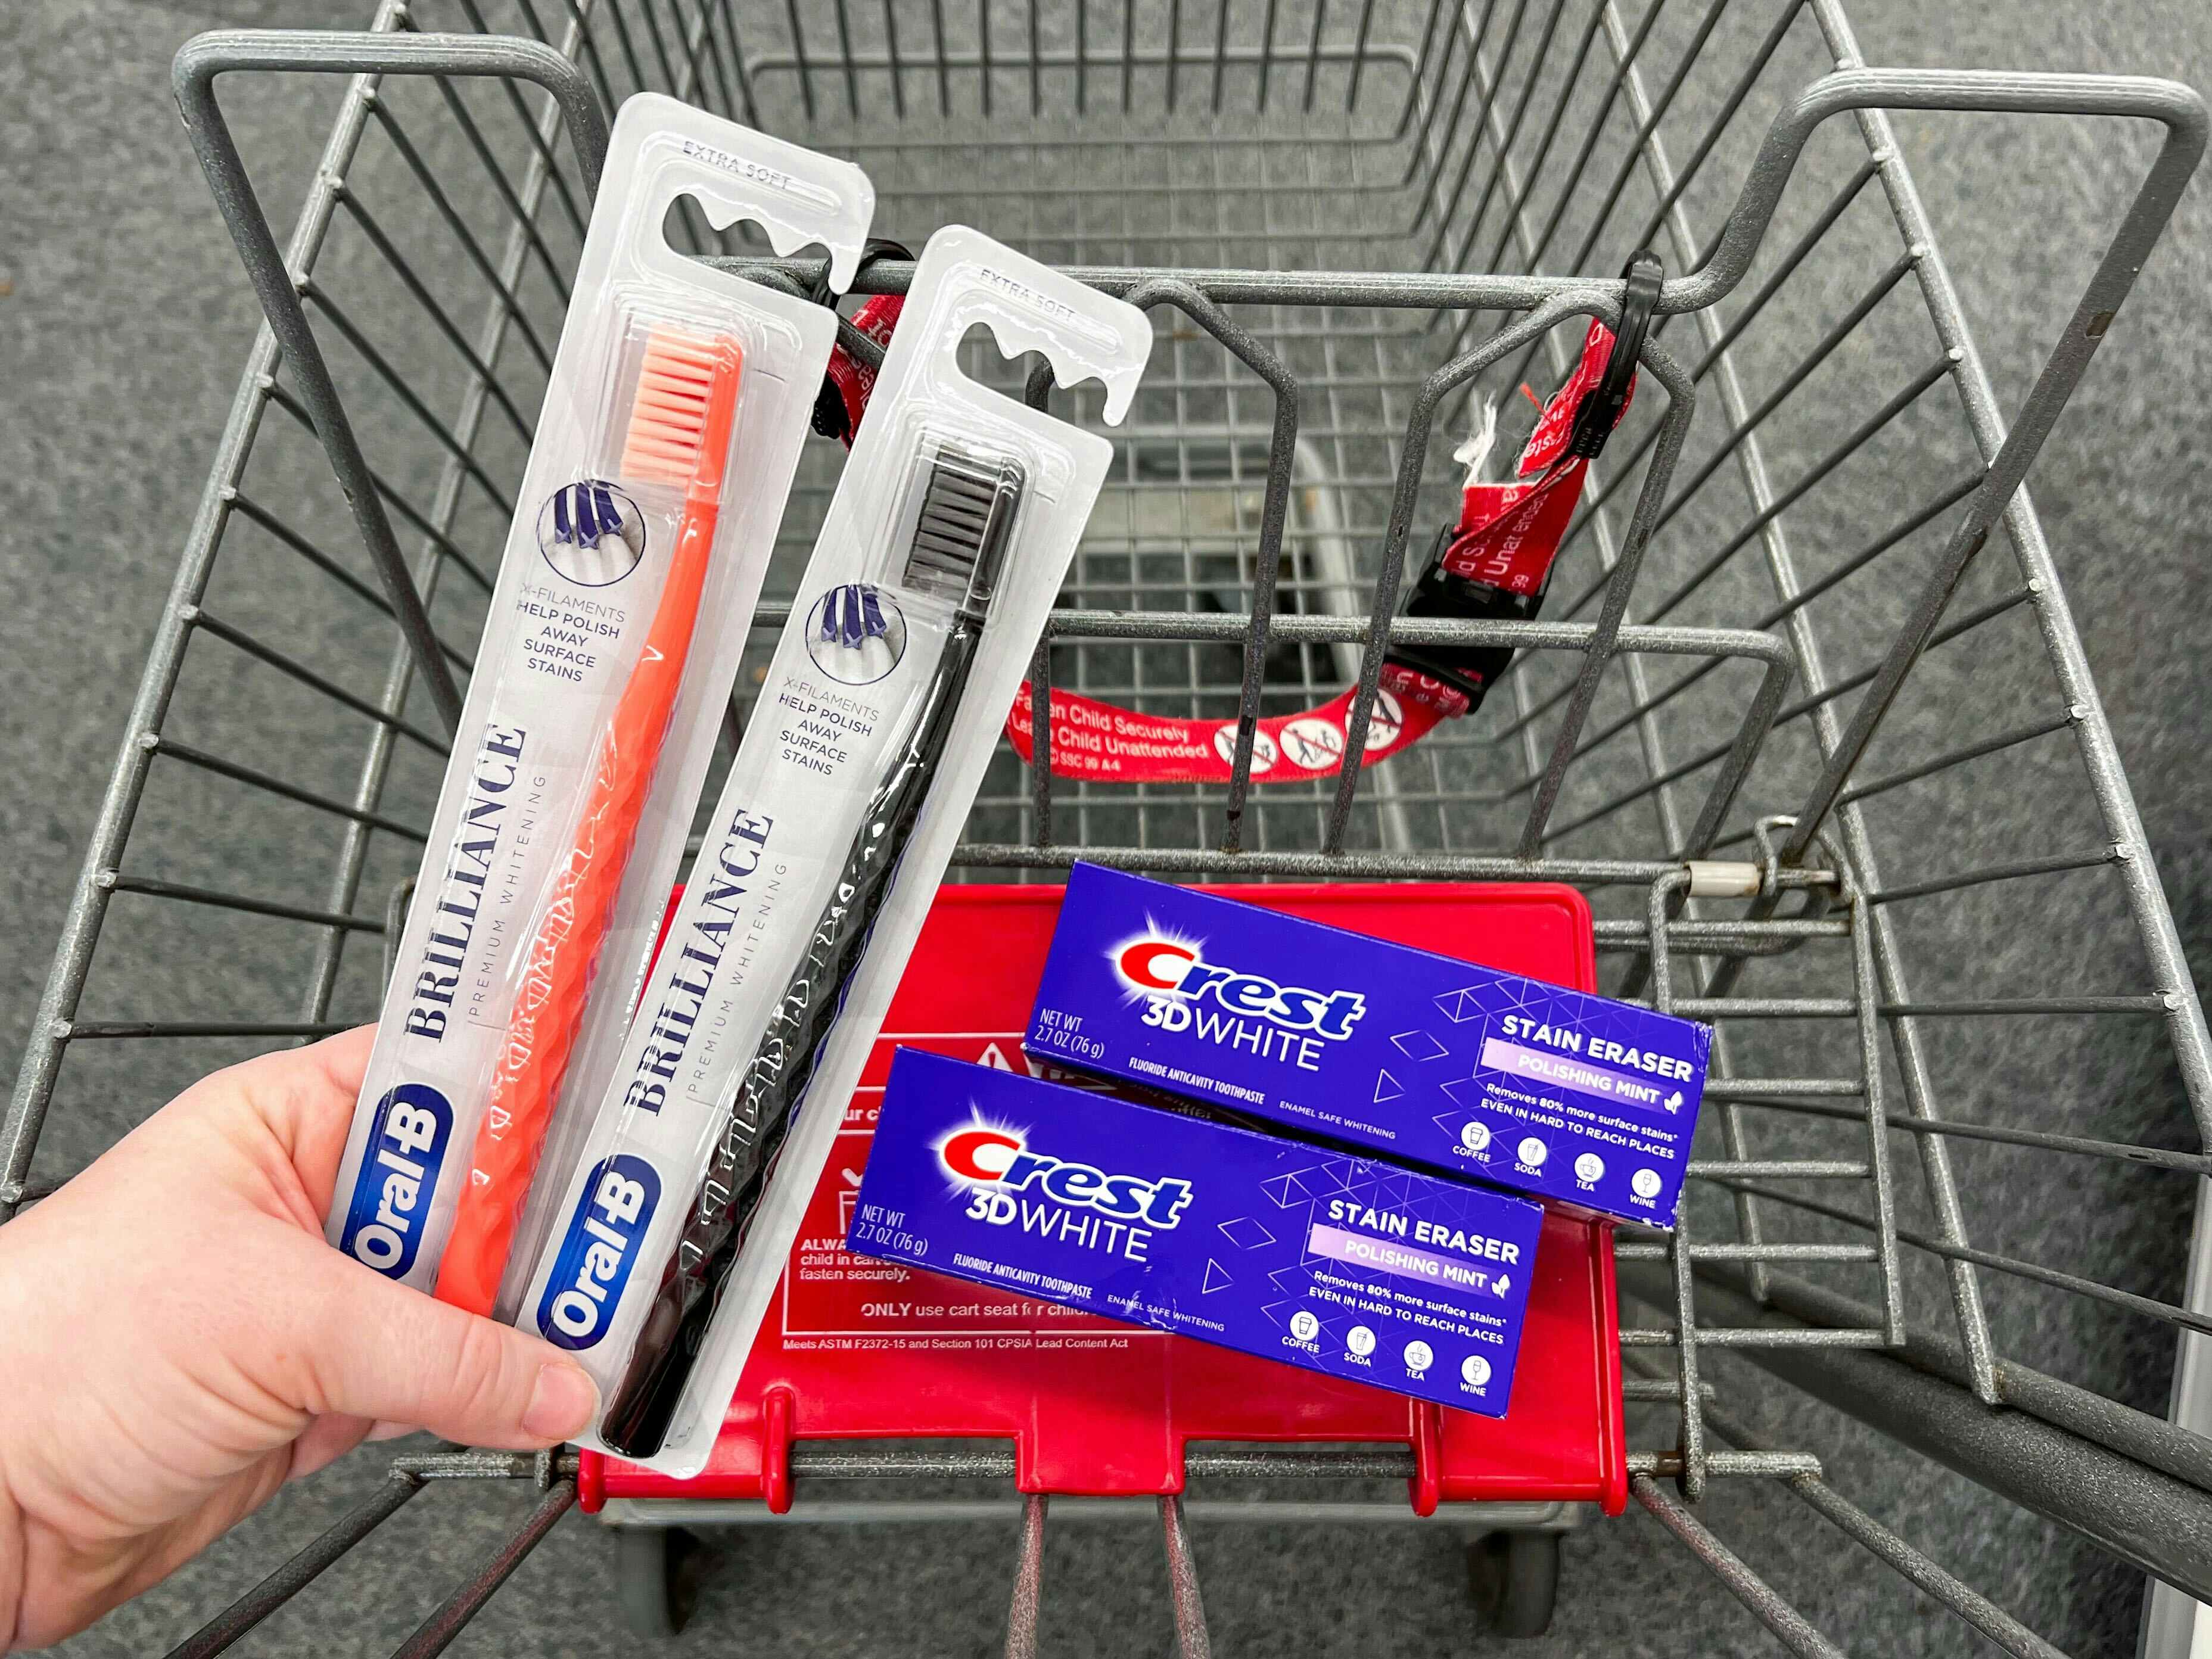 Free Crest and Oral-B Dental Care Products at CVS